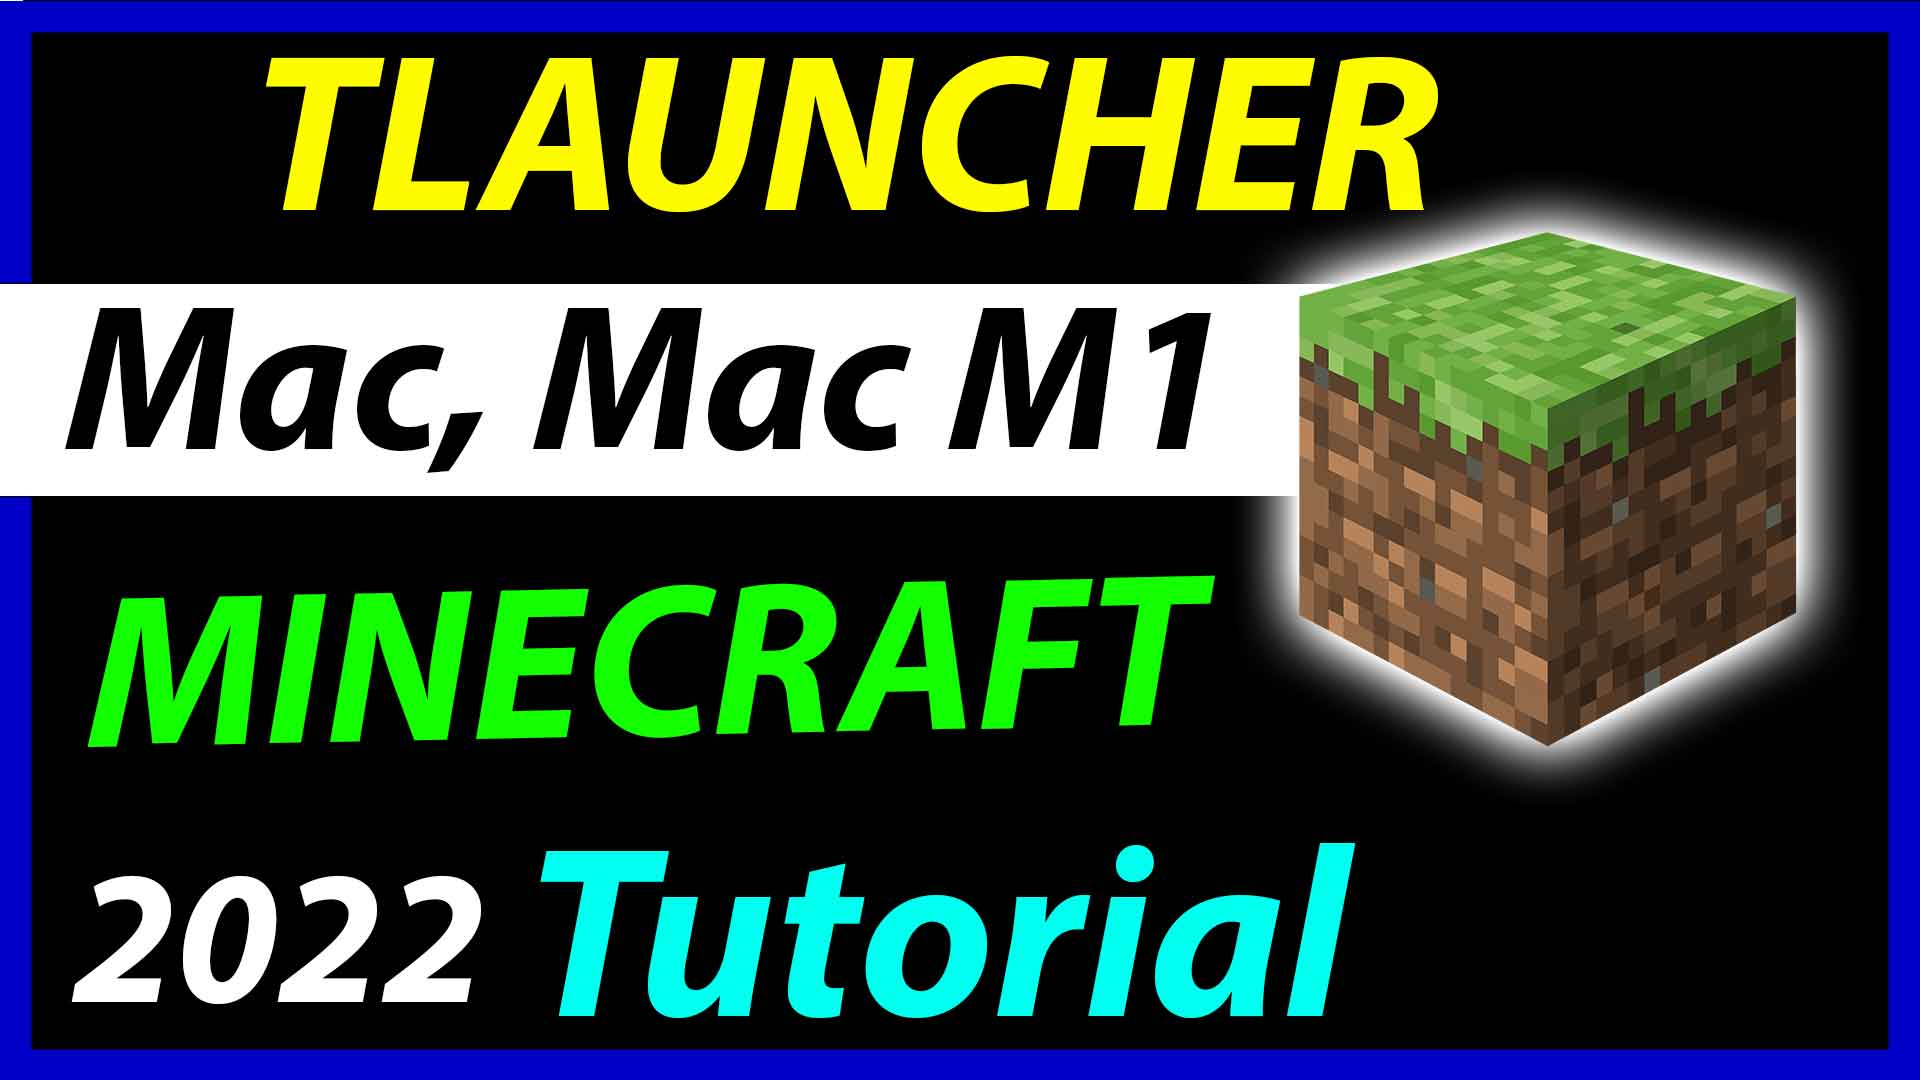 How to Download Tlauncher on Mac, Macbook, M1 chip